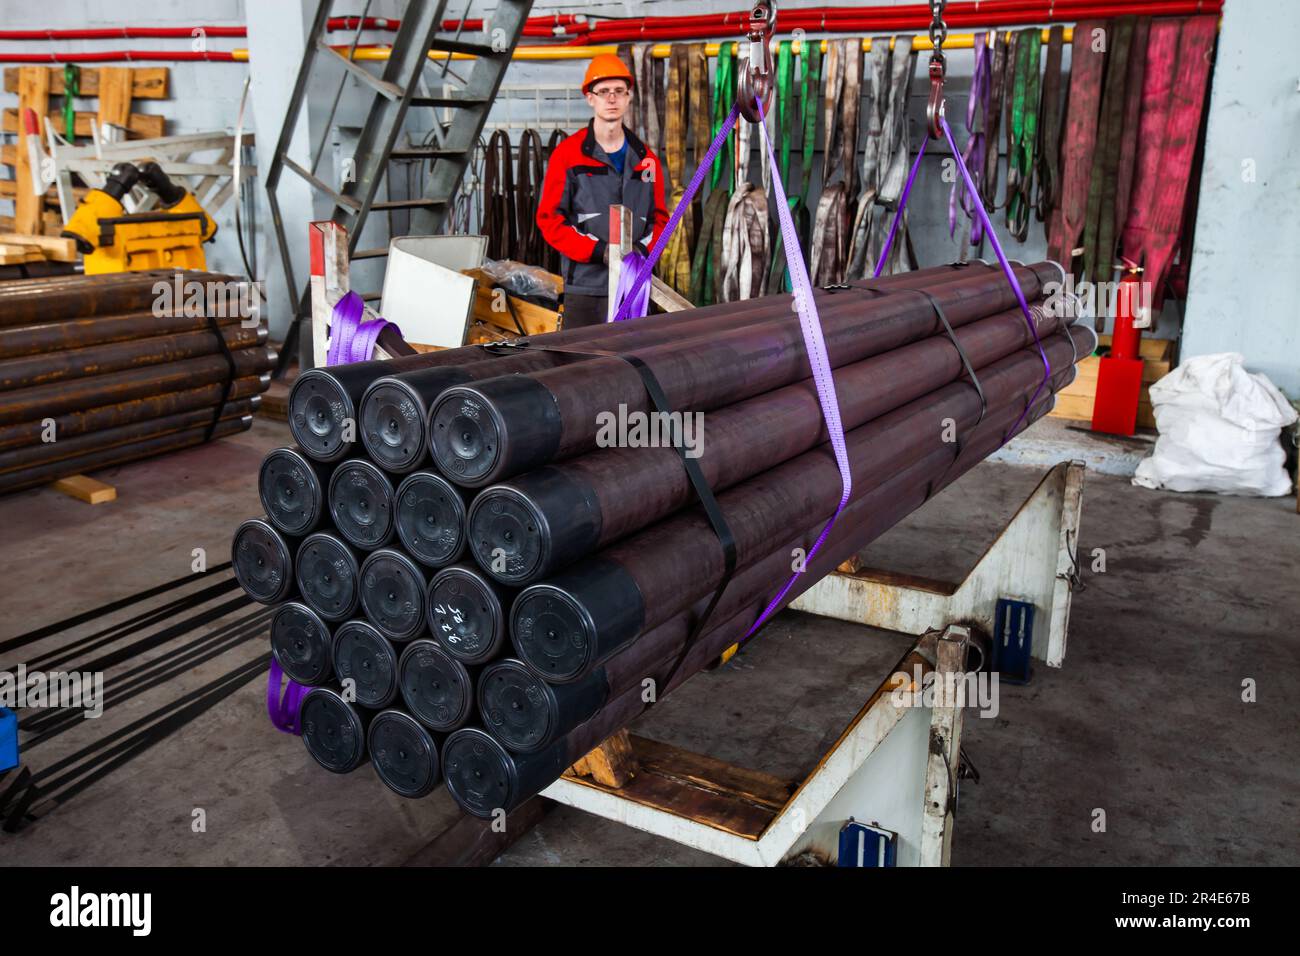 Podolsk, Moscow province - August 02, 2021: Production of oil drill pipes. Worker lifting ready pipes Stock Photo